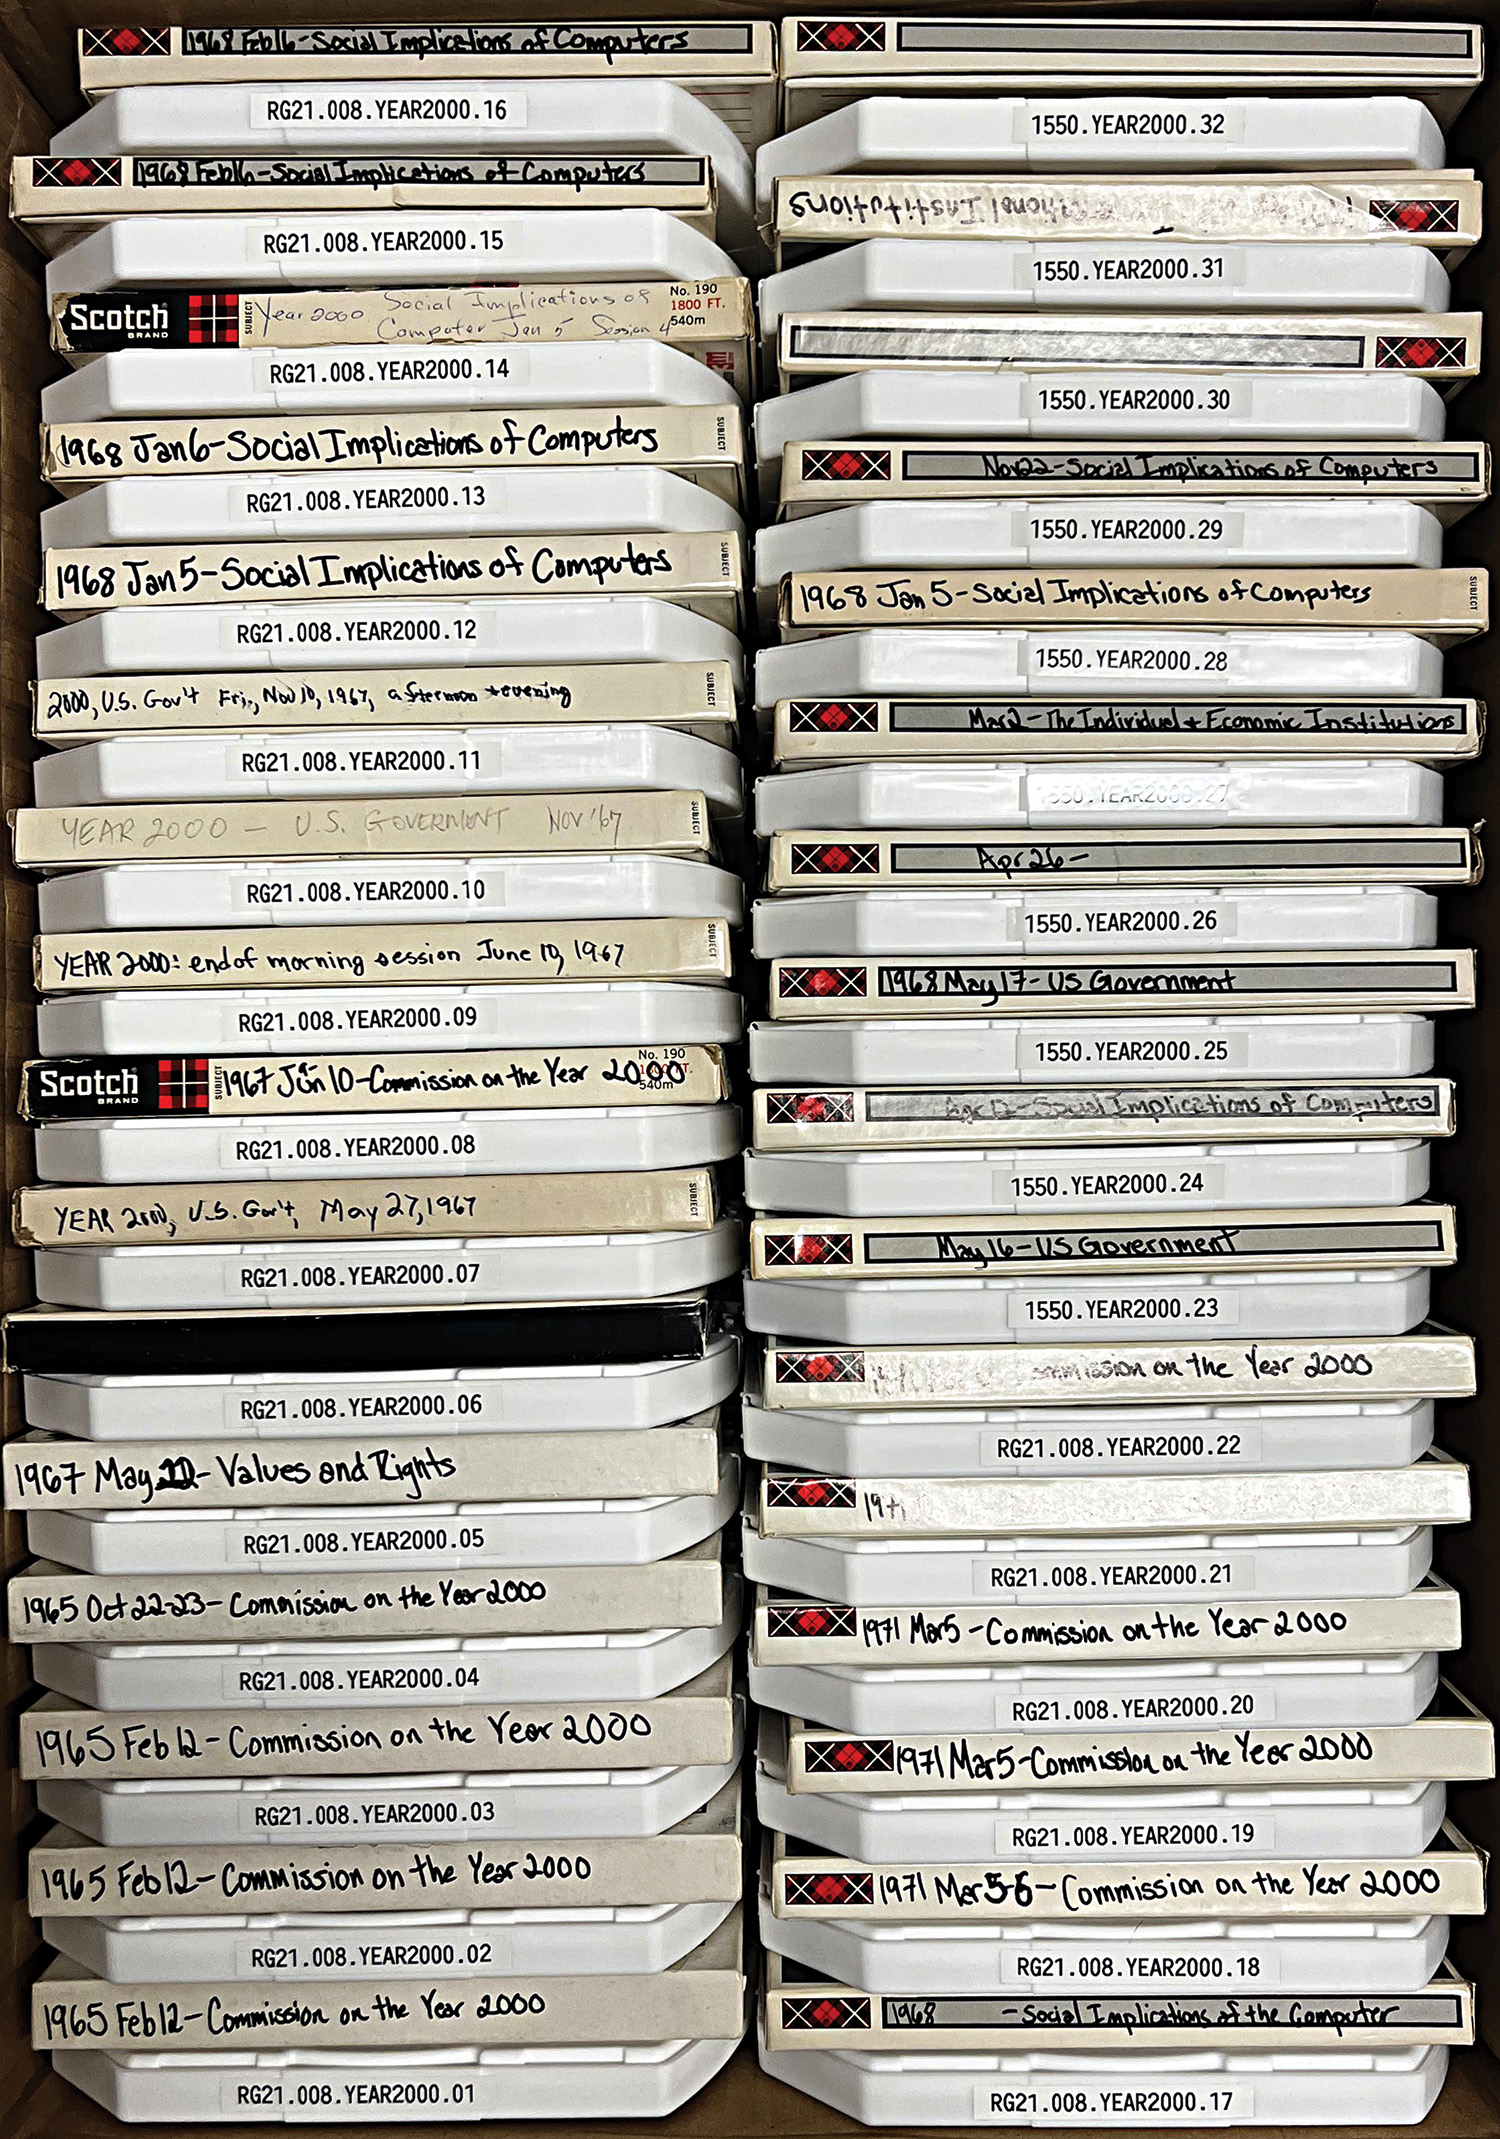 Two columns of audiotapes boxed in white cases with labels showing sequenced alphanumeric codes and the category “YEAR 2000.”